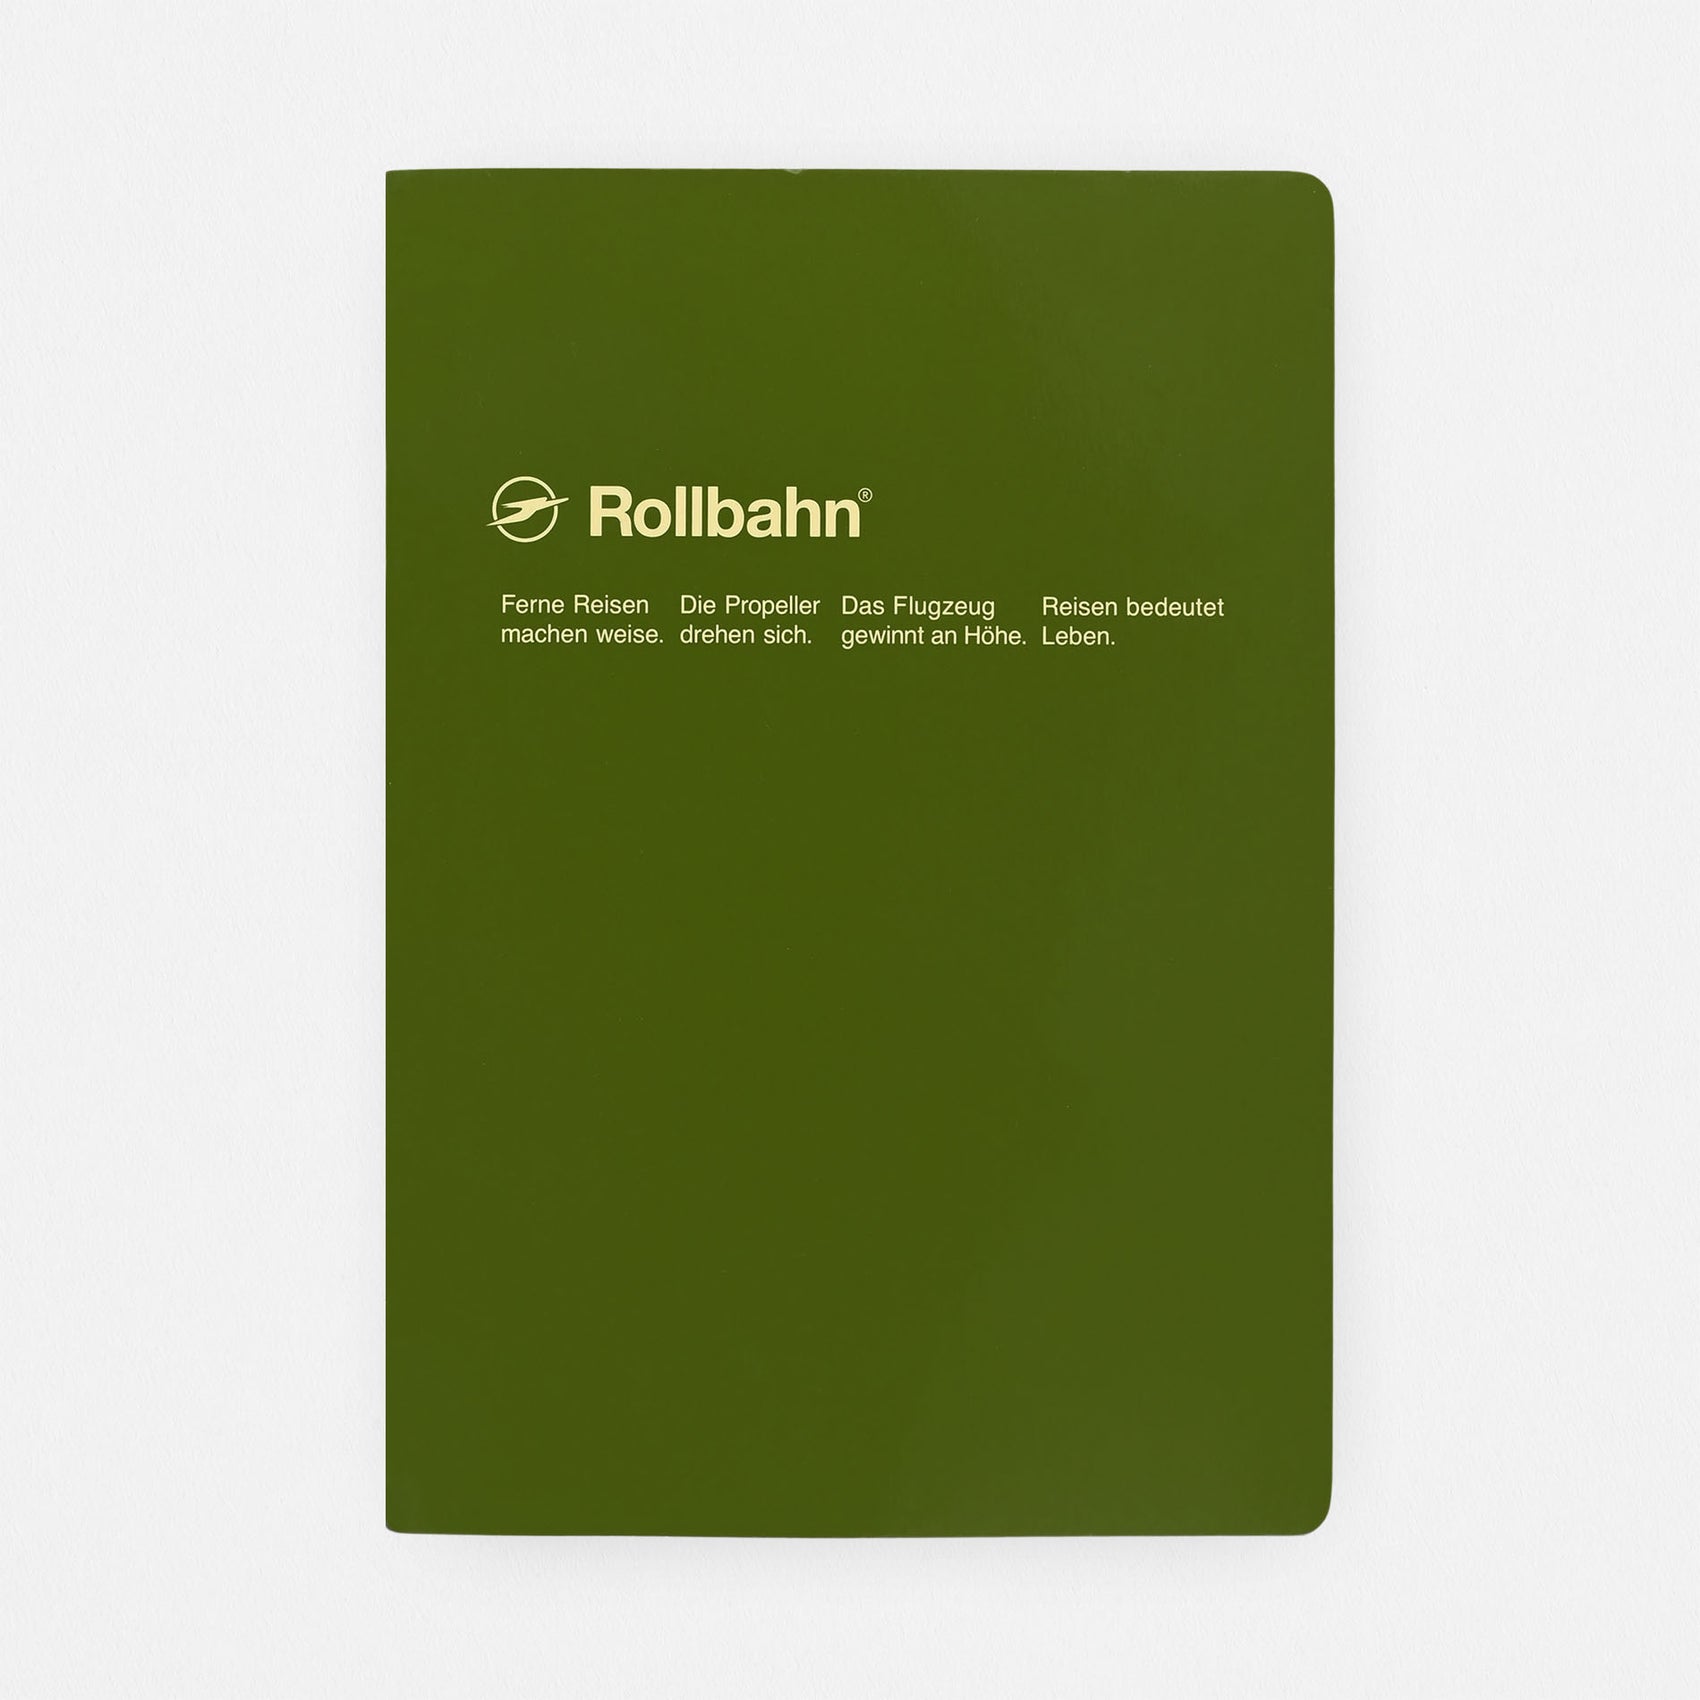 Rollbahn "Note" Notebook Pocket, Large, A5 Or Extra Large  | 10 Colors